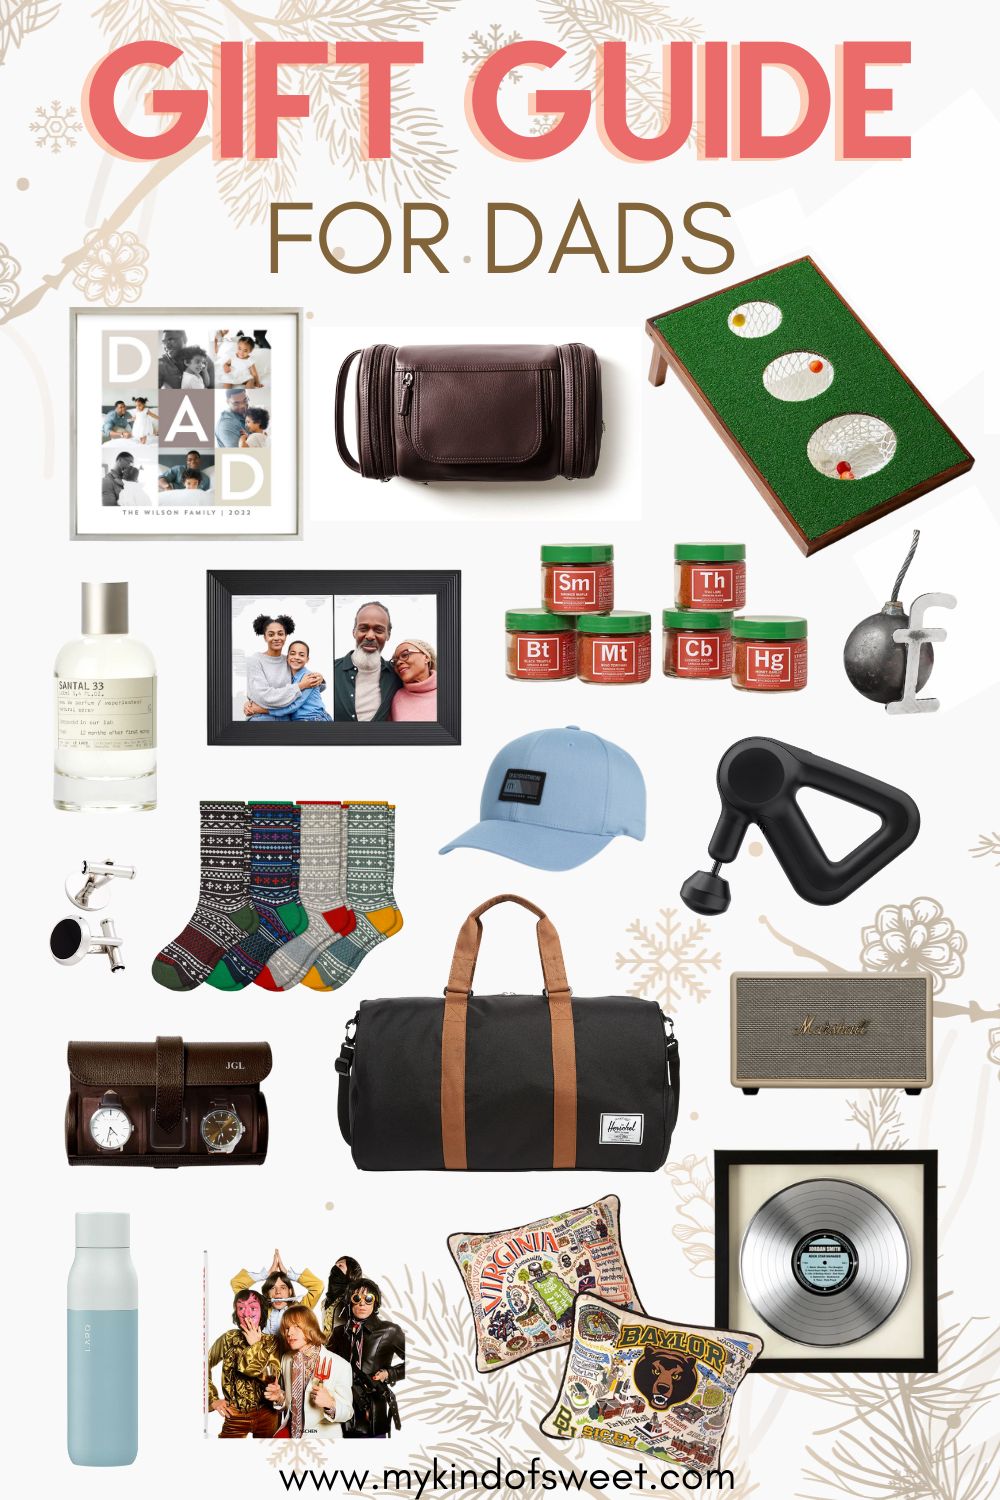 Gift Guide for Dads